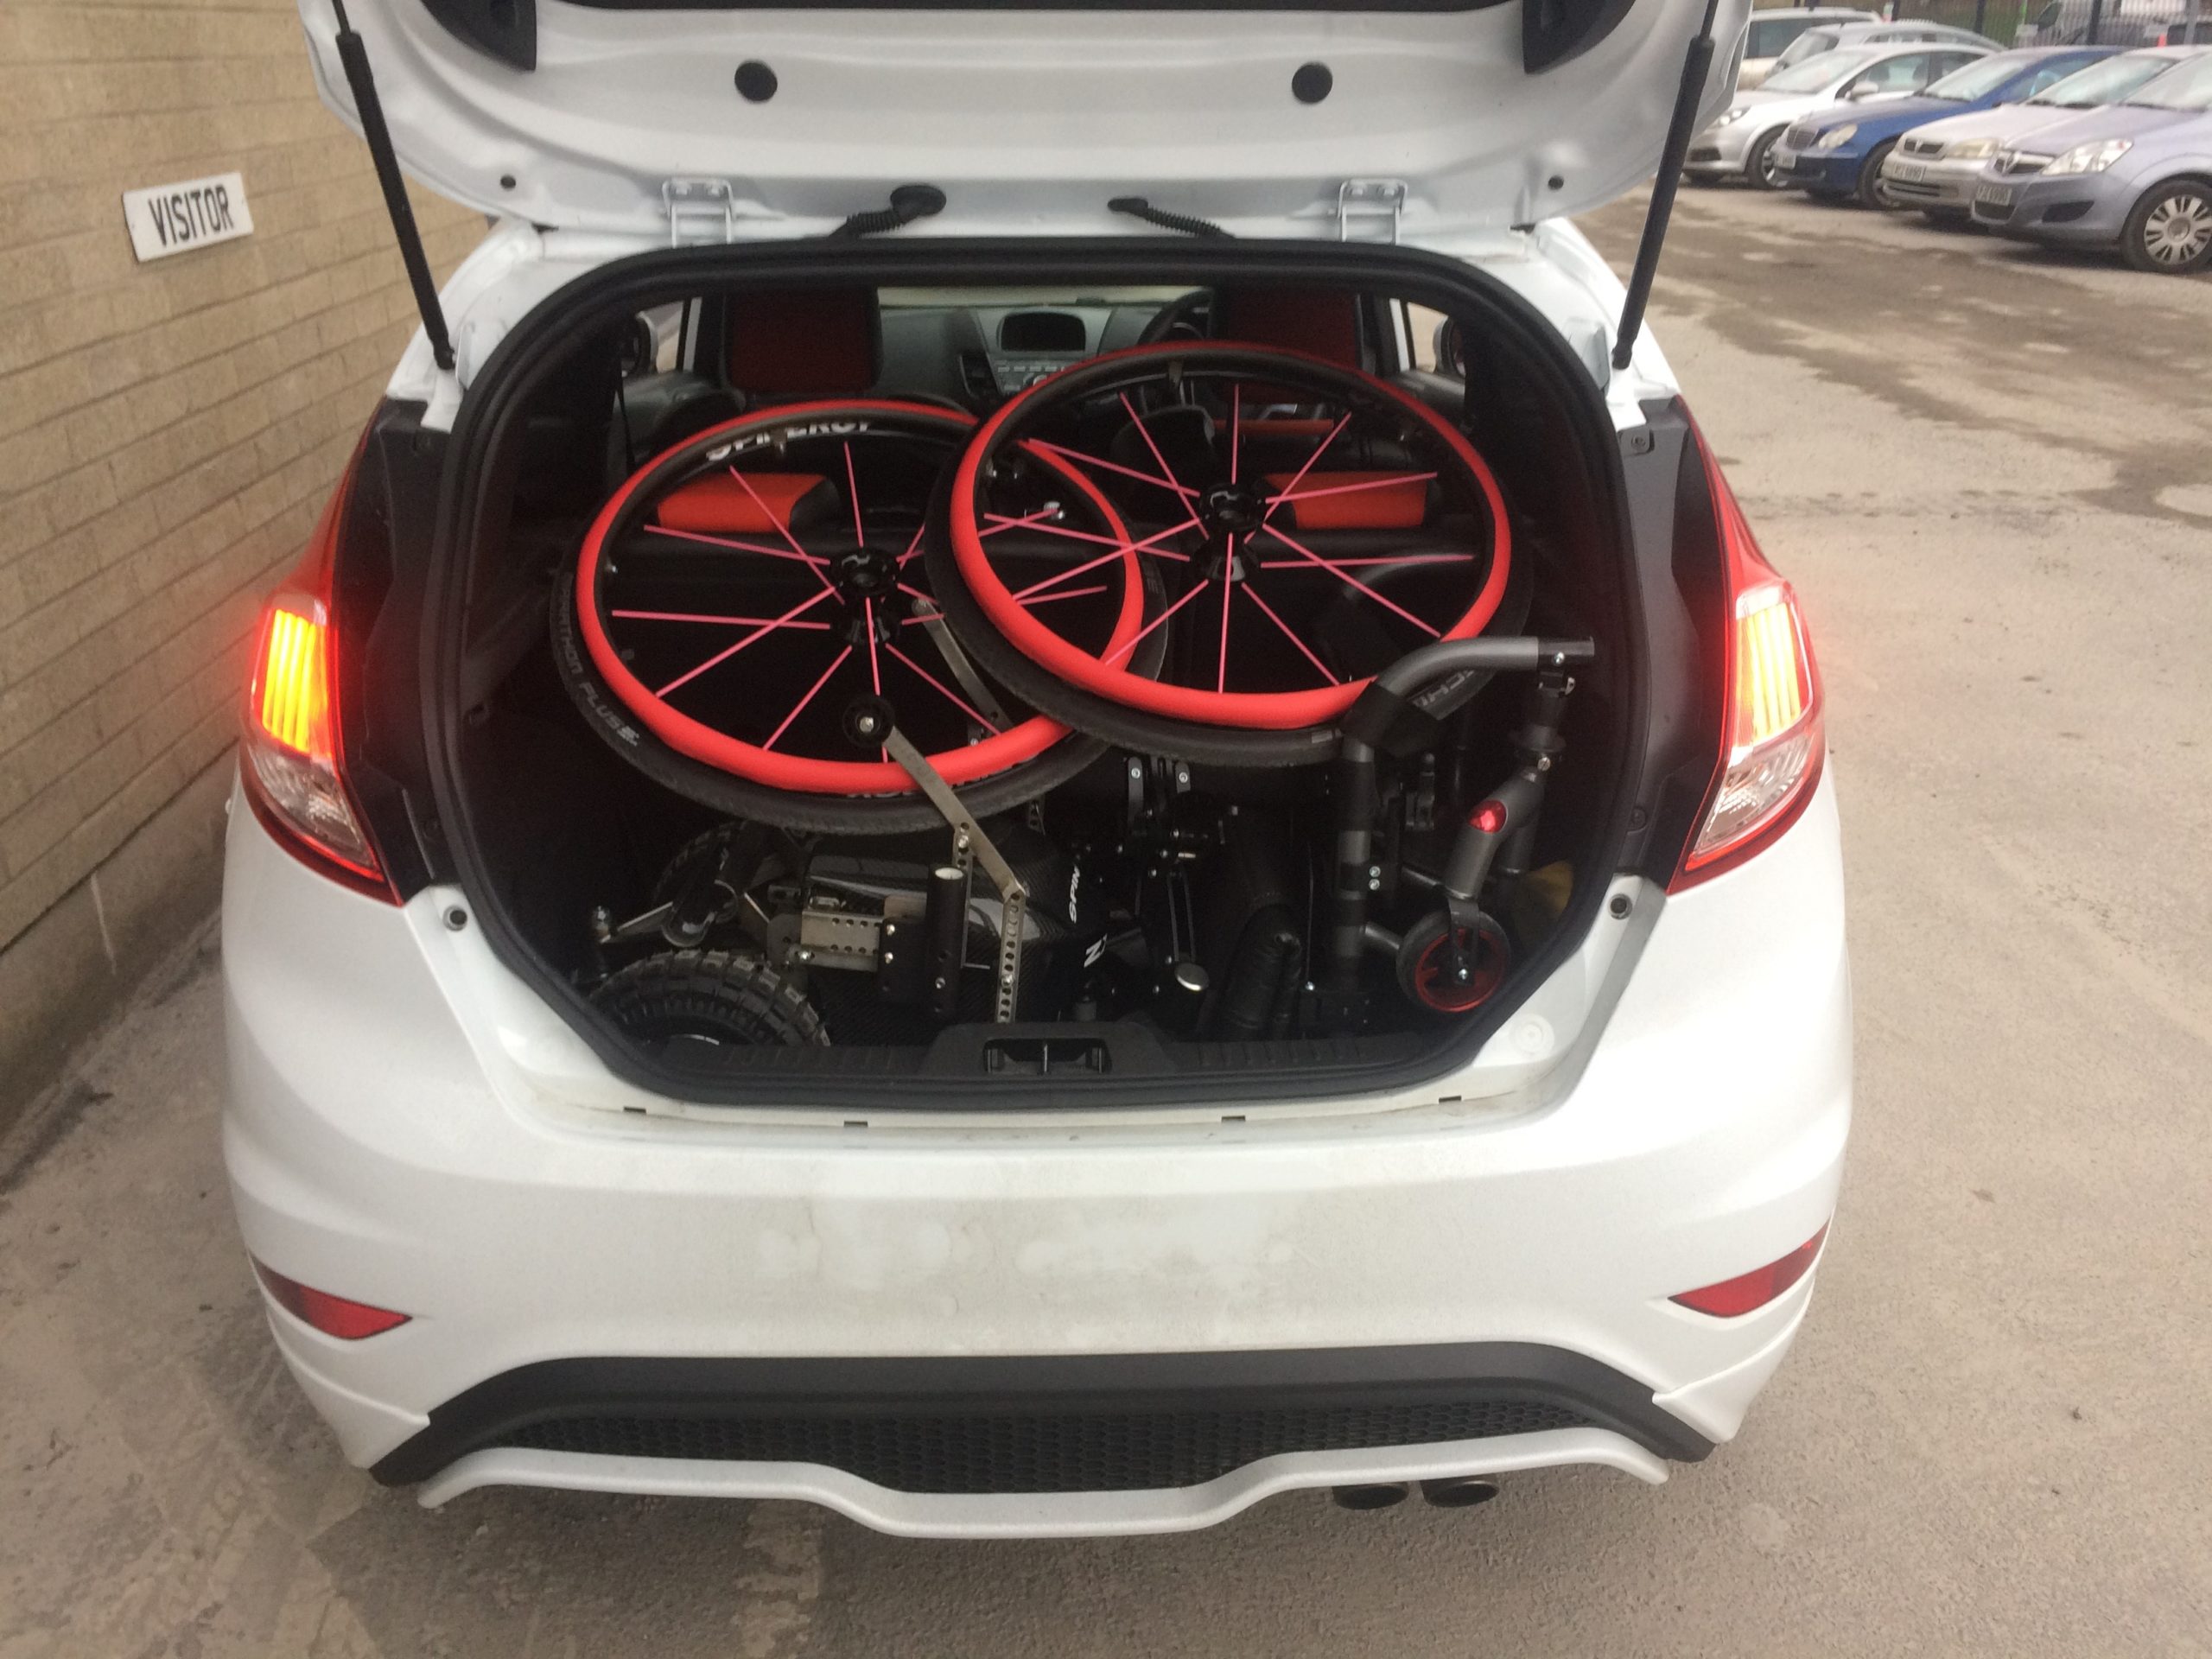 ZX-1 Power Add on, RGK Tiga Fx / RGK Frontwheel fit in the boot of a small car